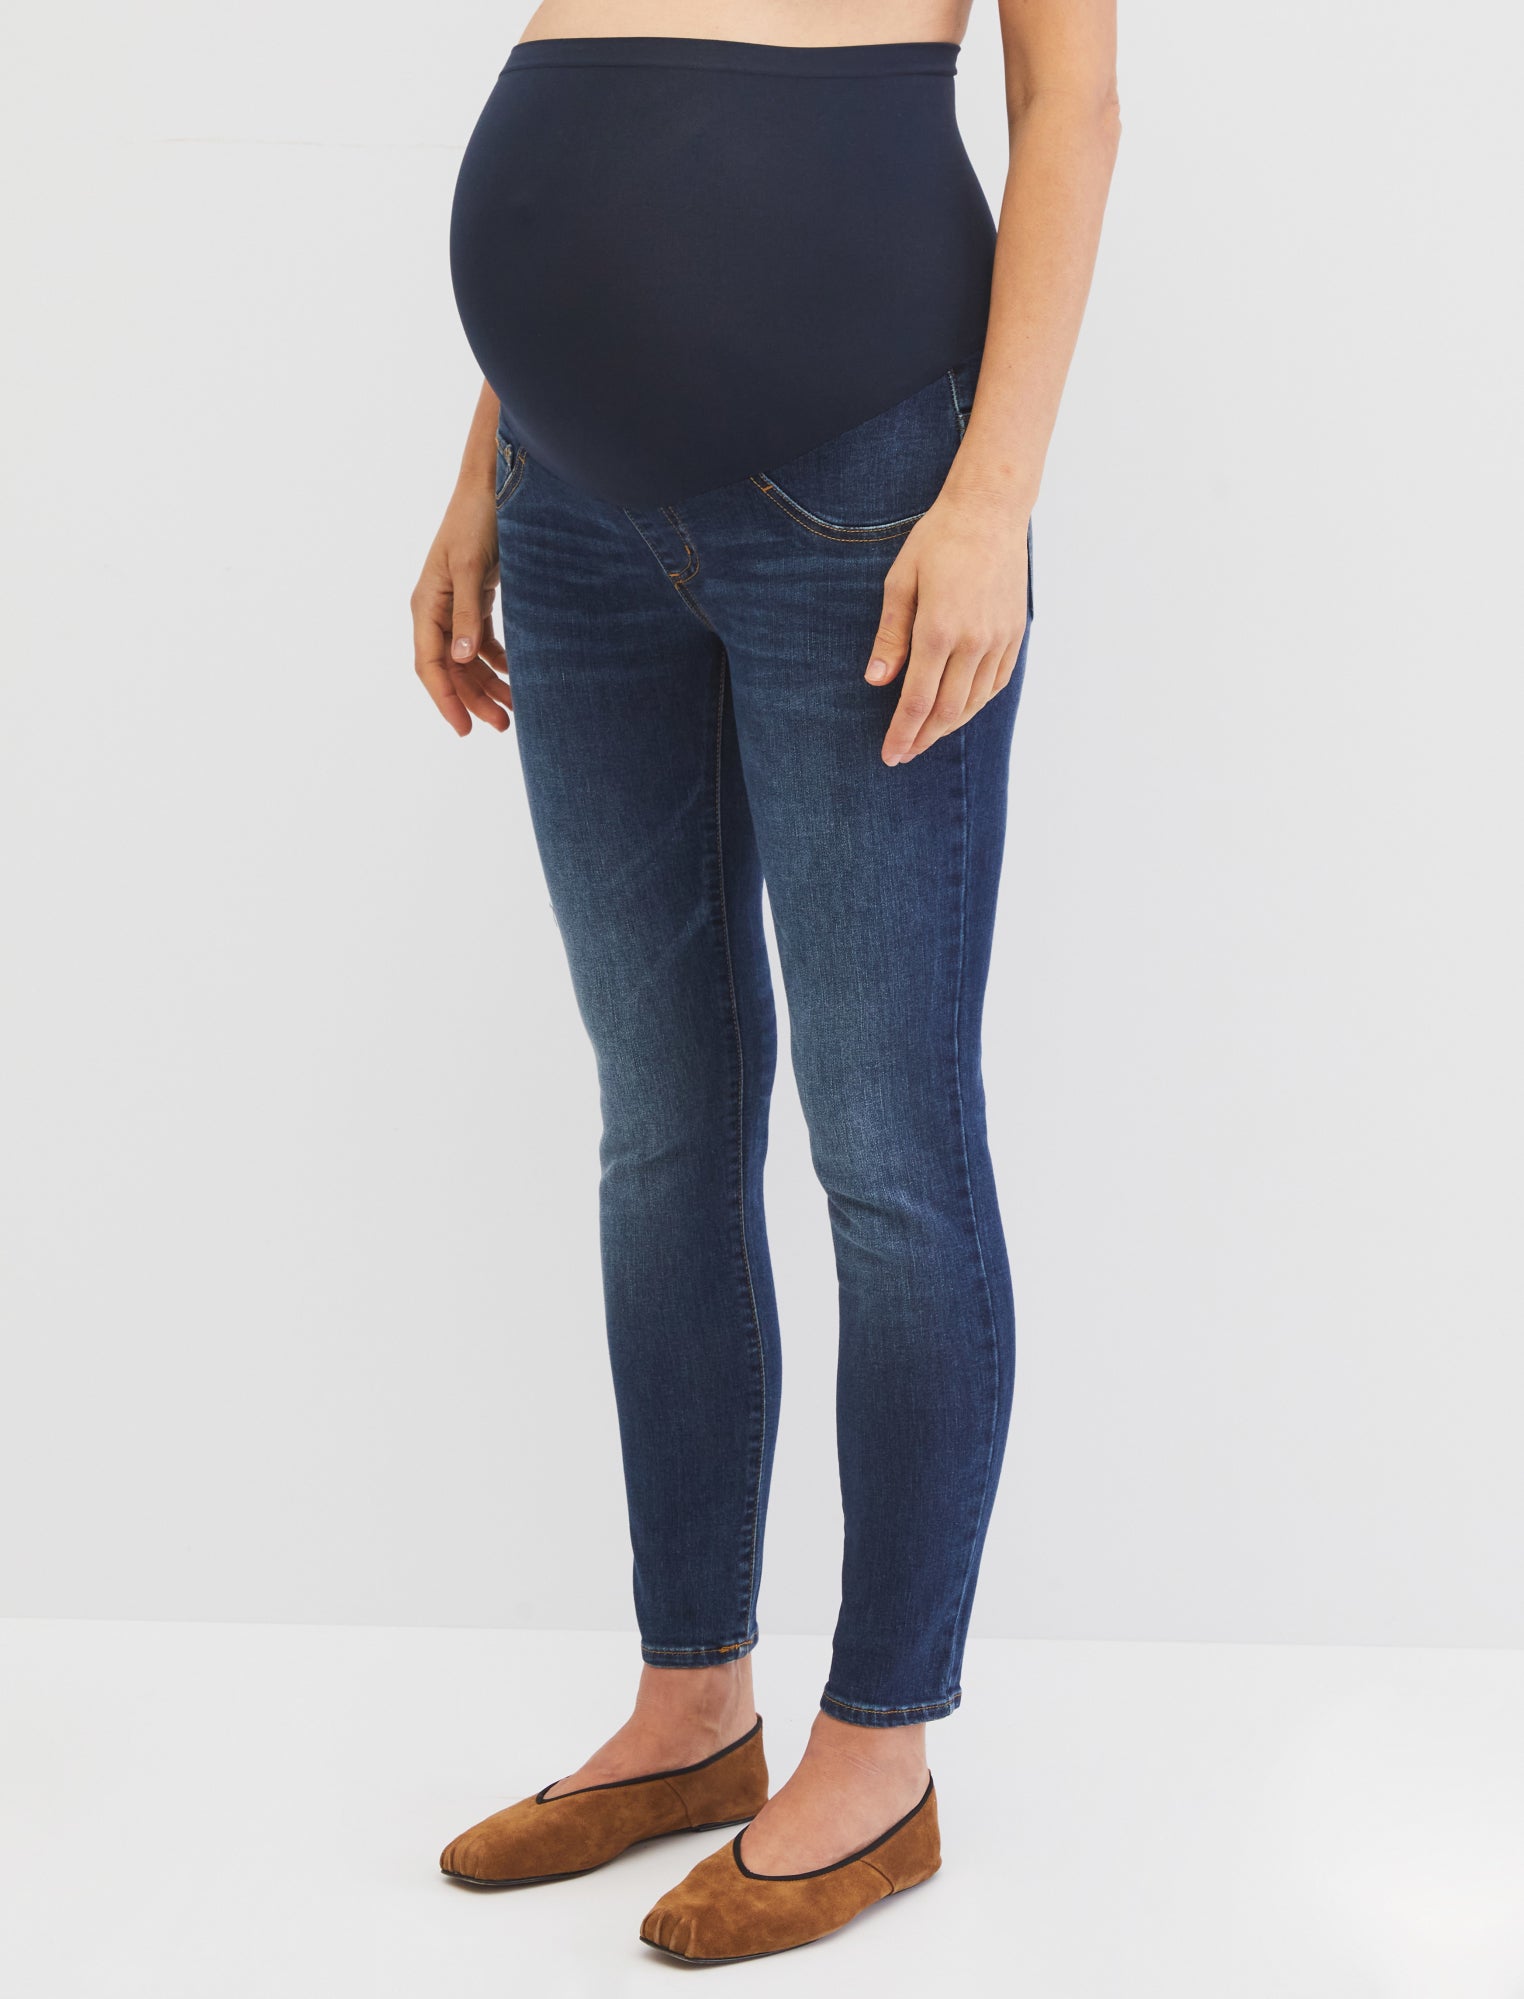 Sustainable Secret Fit Belly® Skinny Leg Maternity Jeans